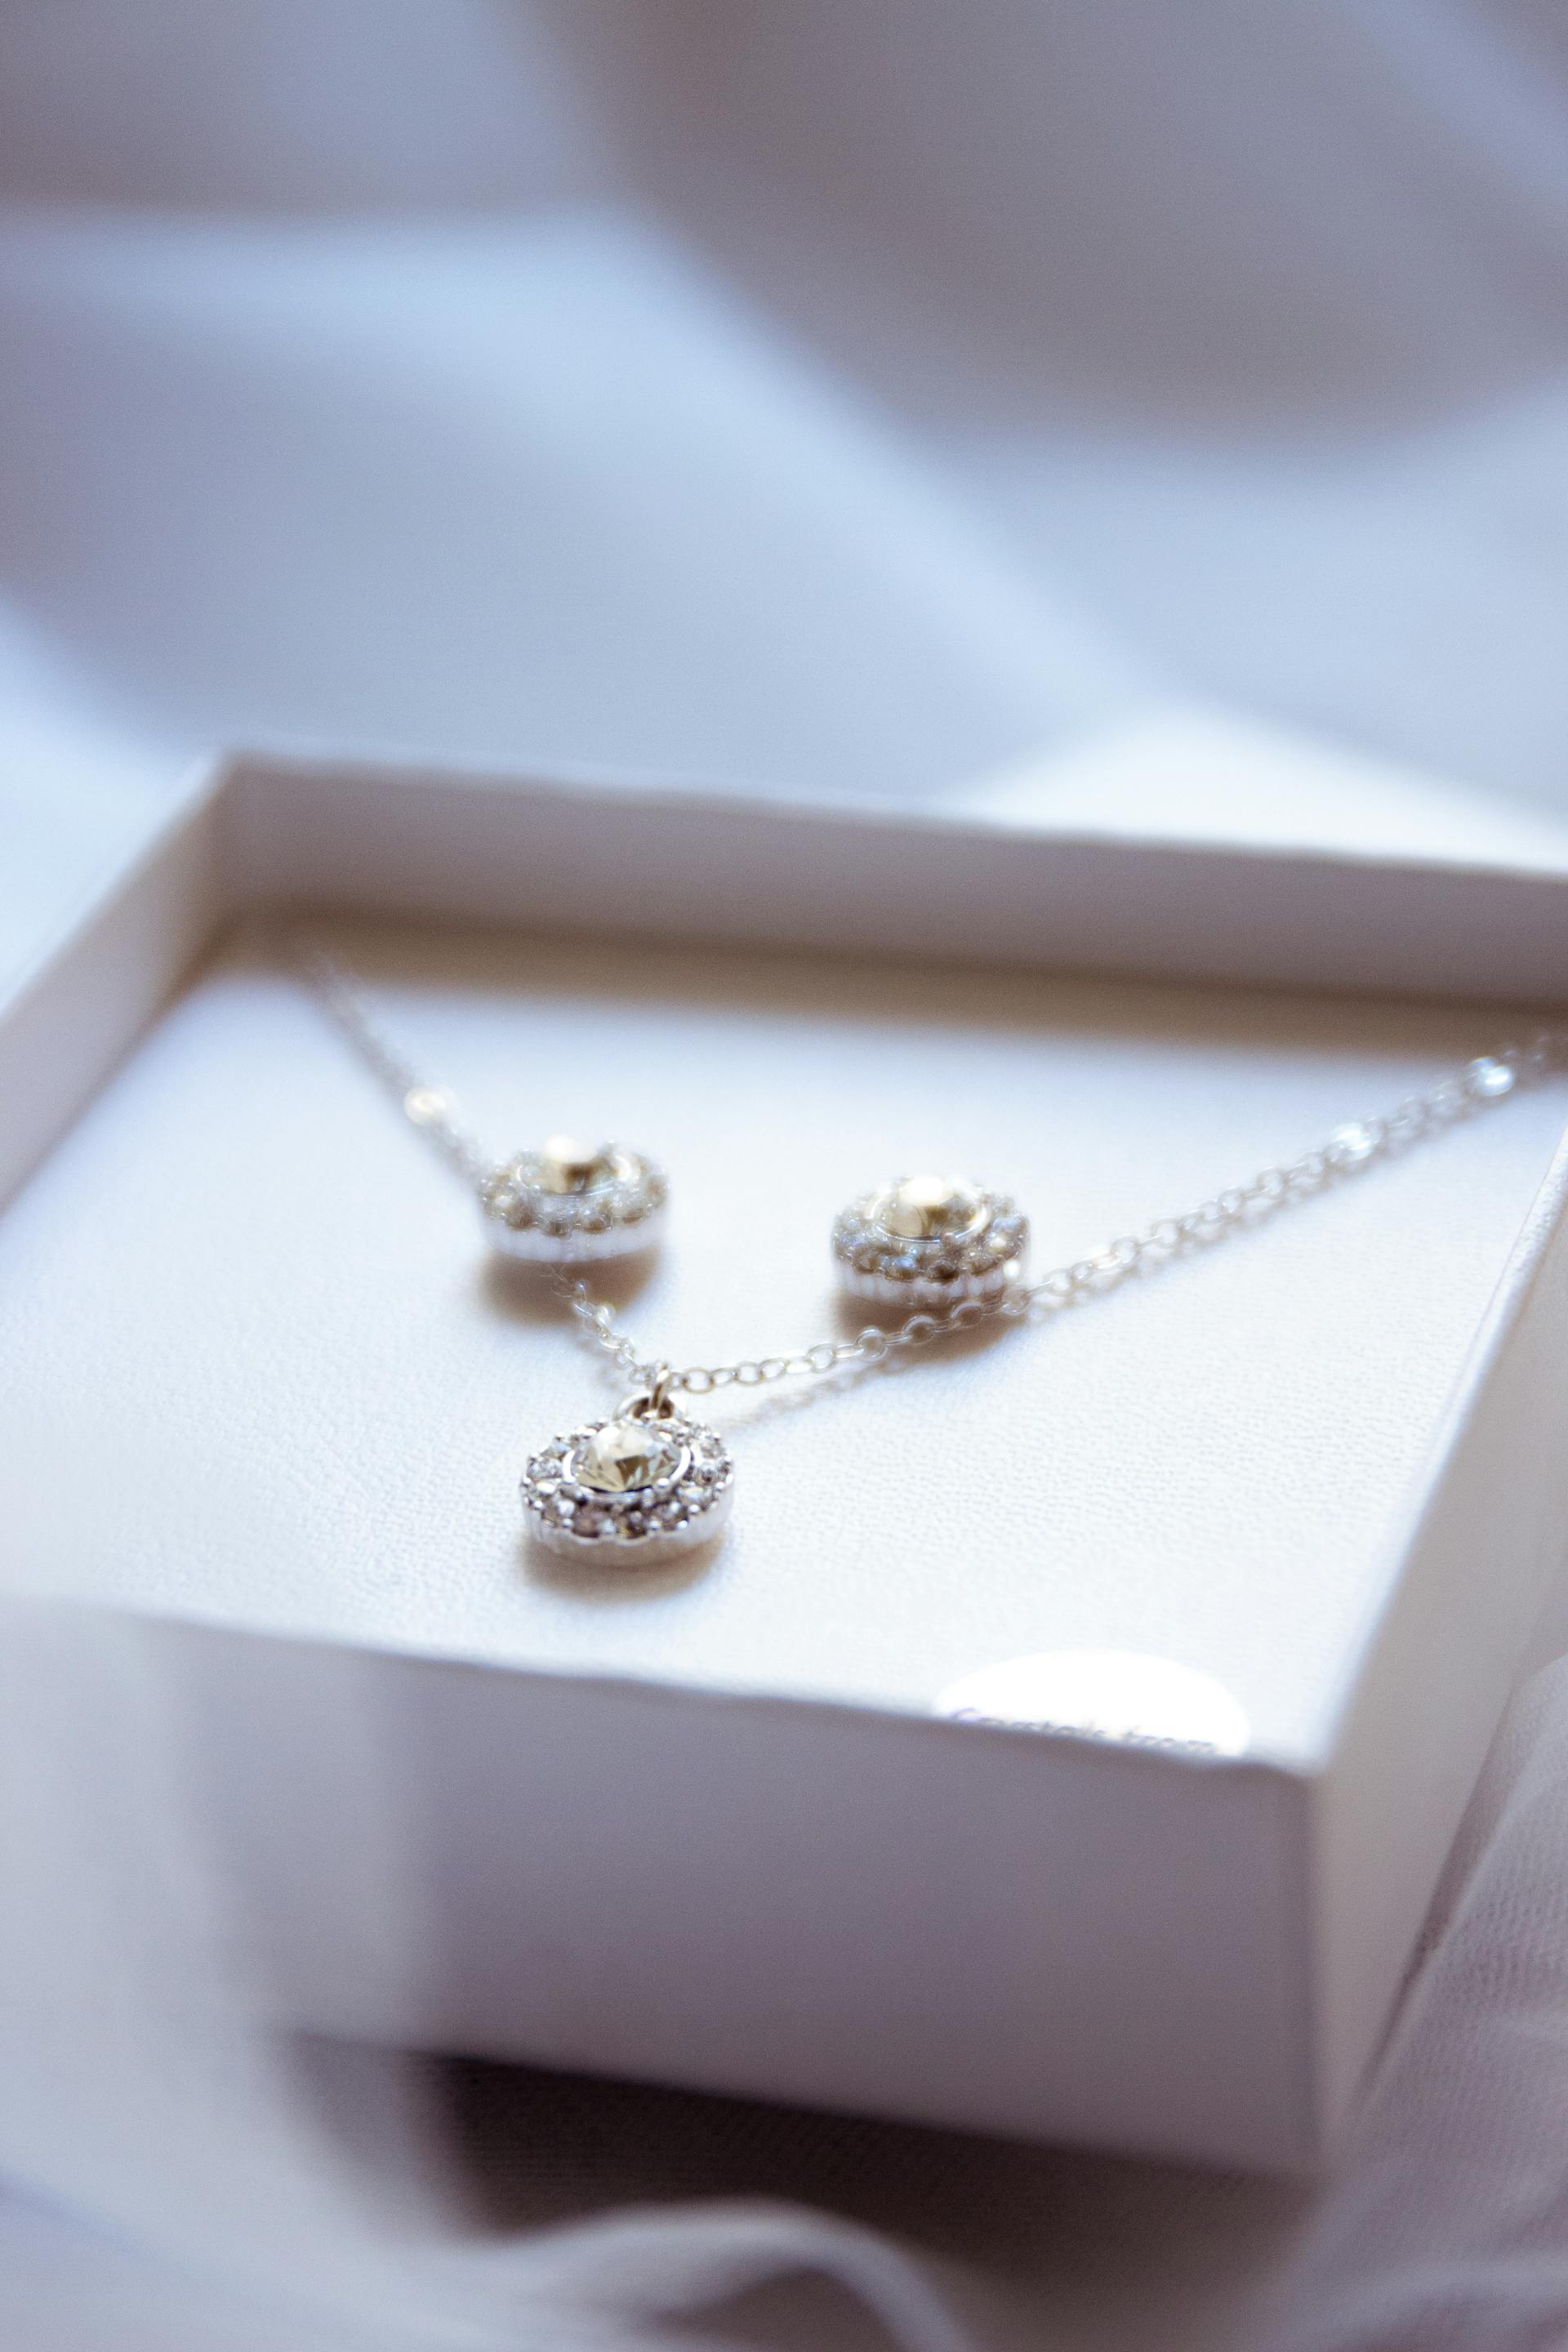 A close-up shot of a necklace in a box | Source: Pexels